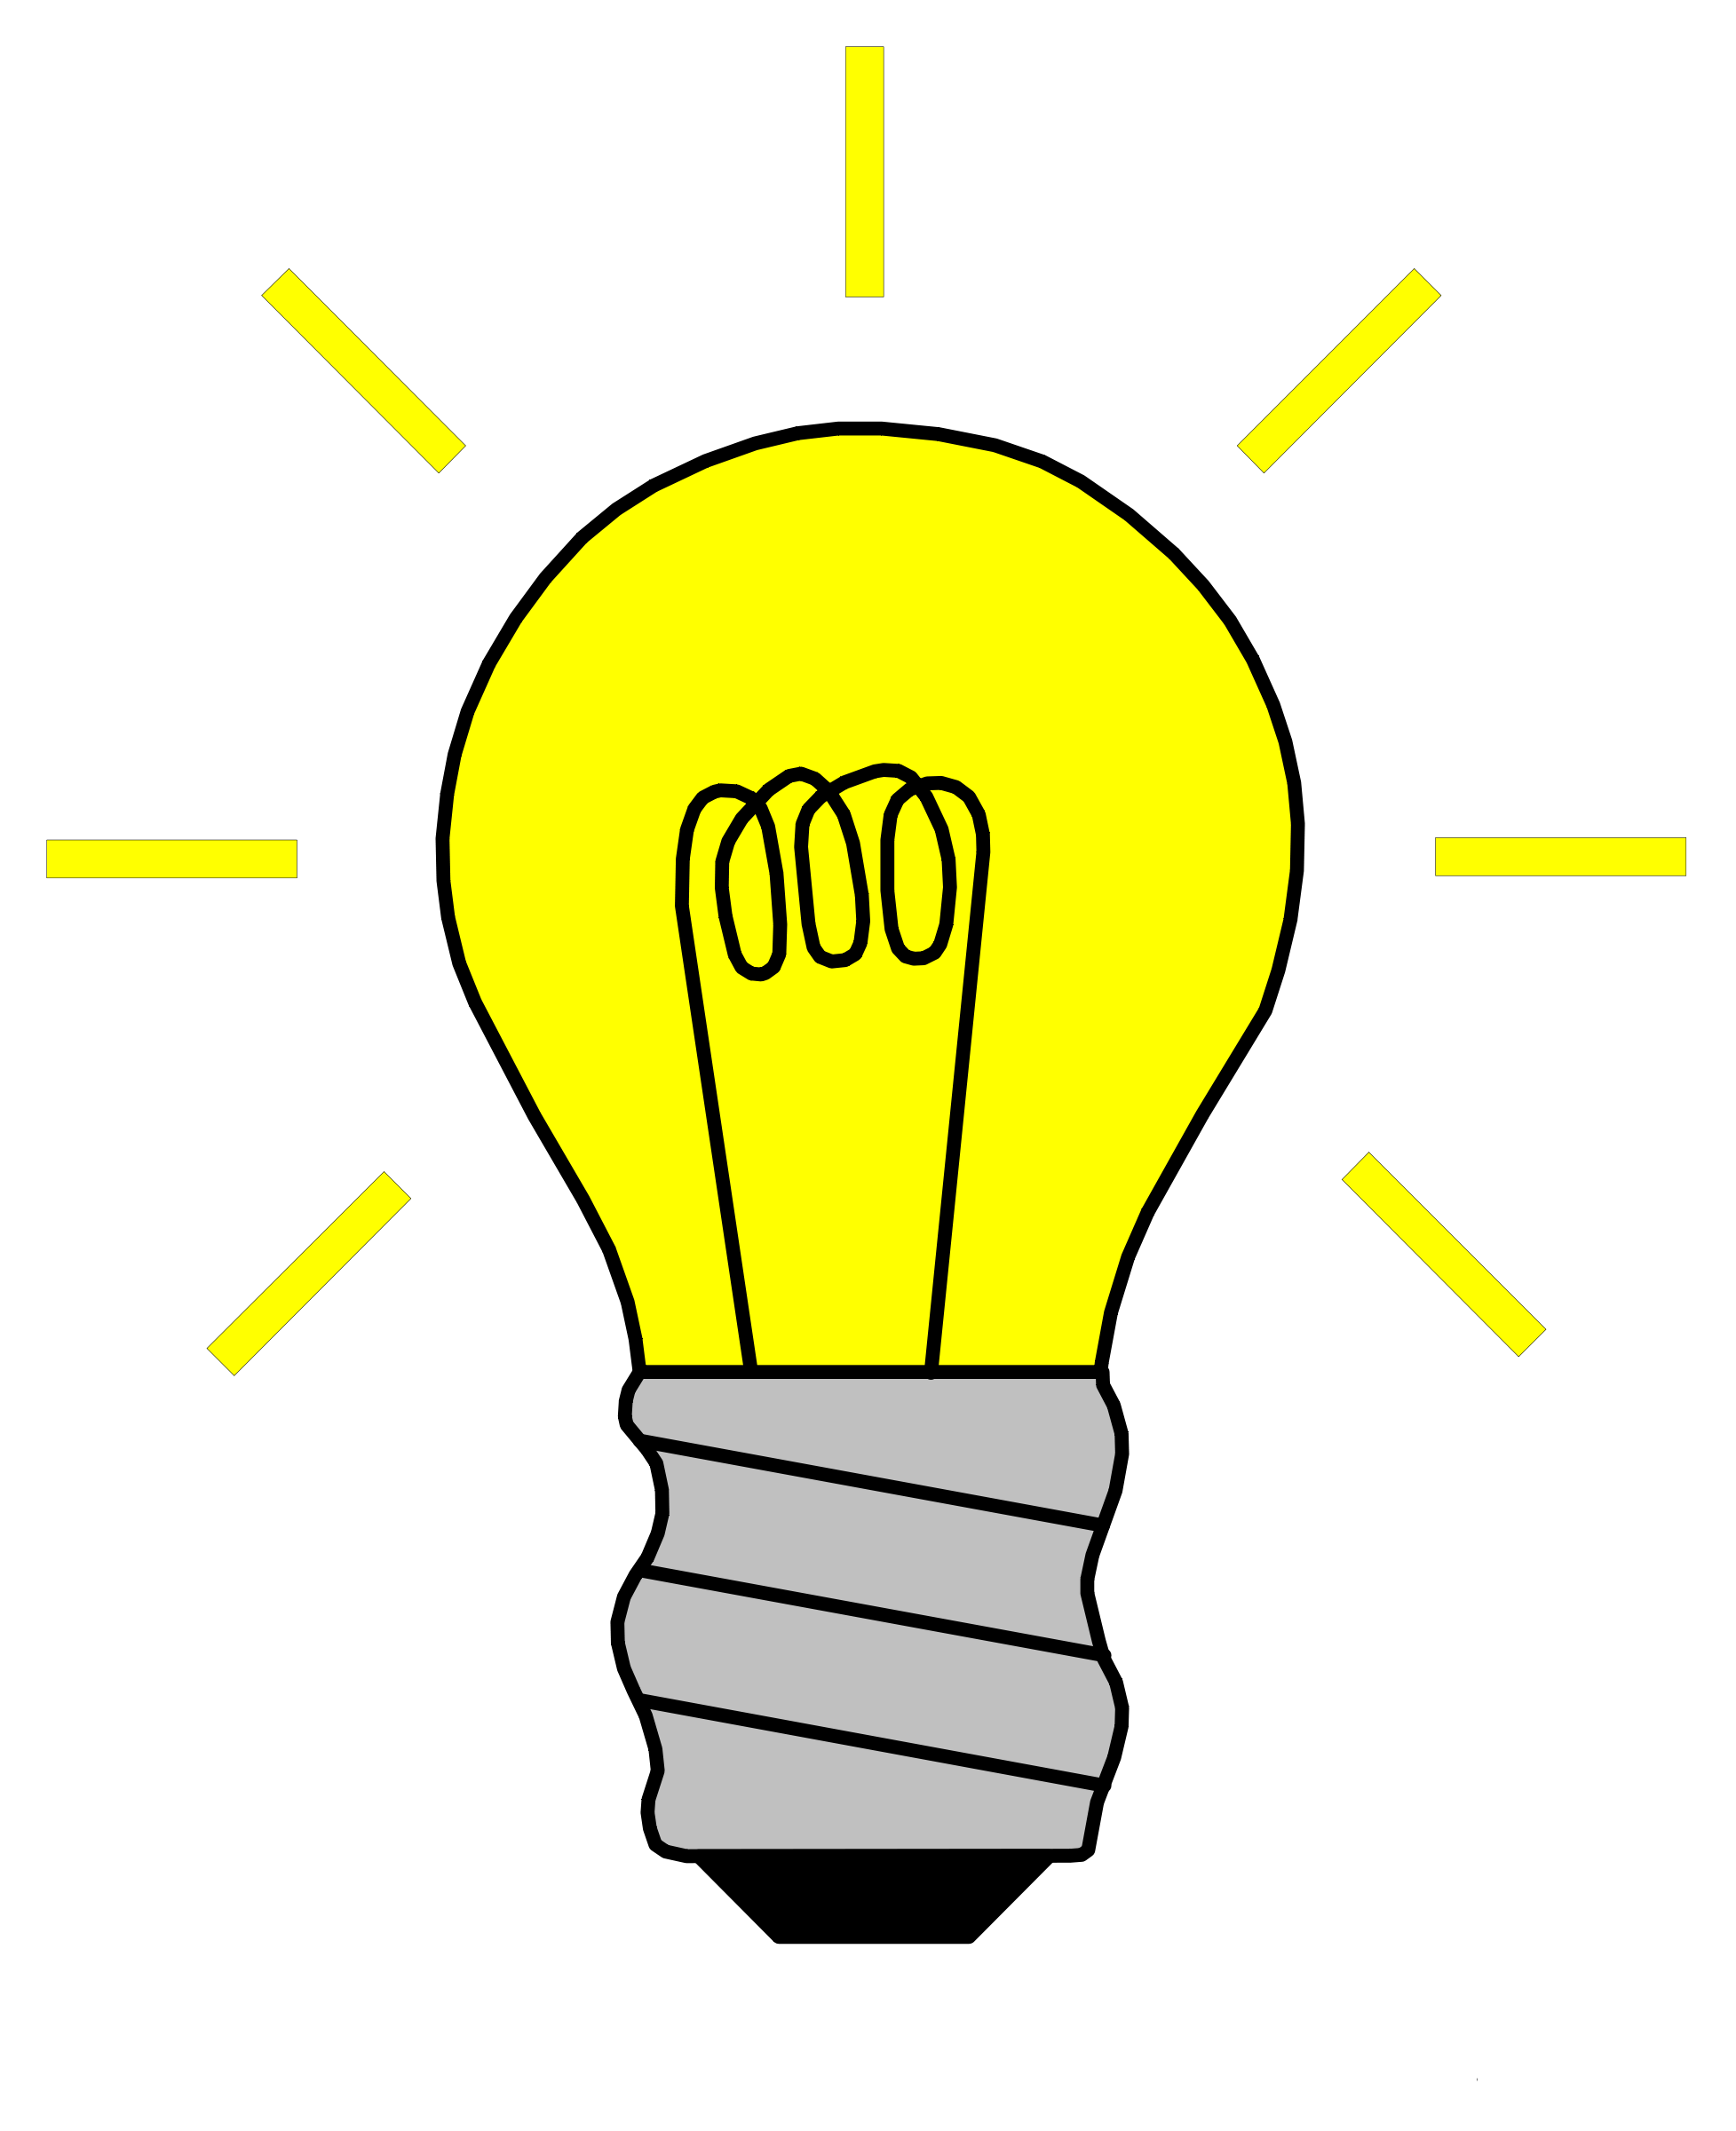 Pictures of light bulbs clipart - ClipartFox